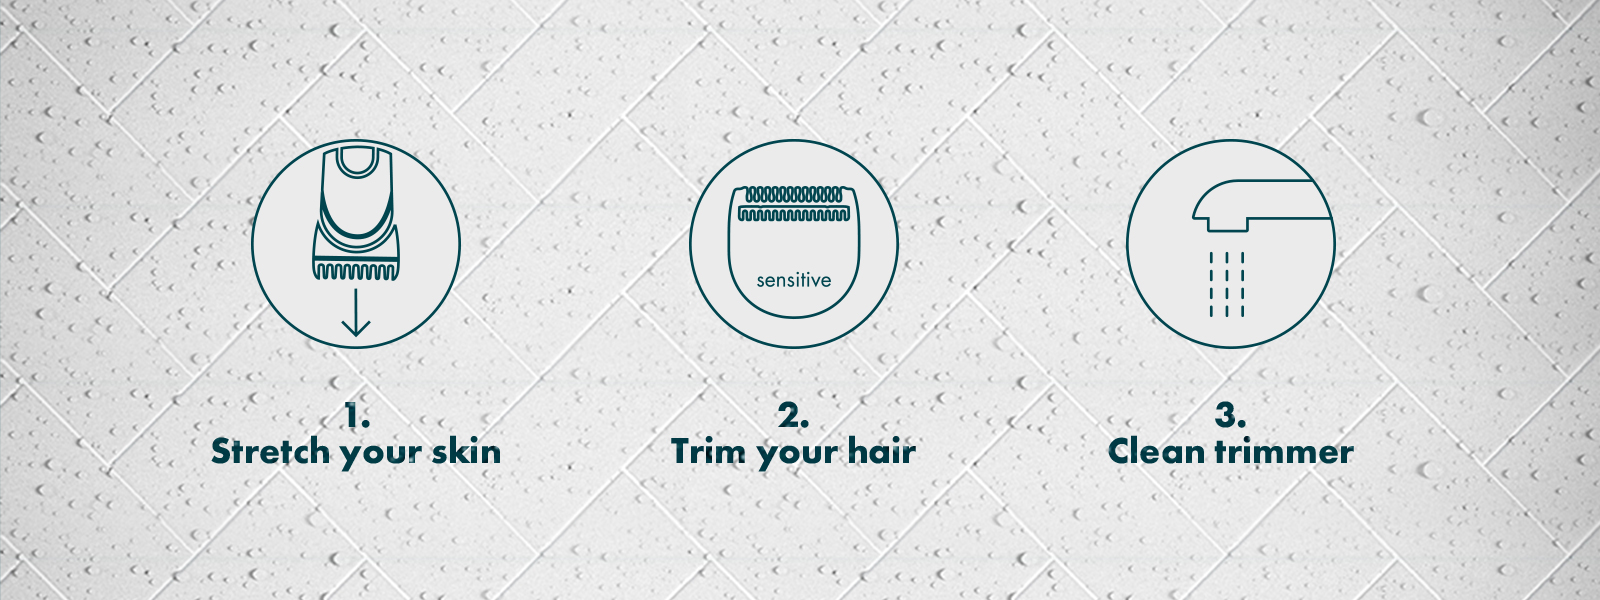 1. Stretch your skin. 2. Trim your hair. 3. Clean trimmer.